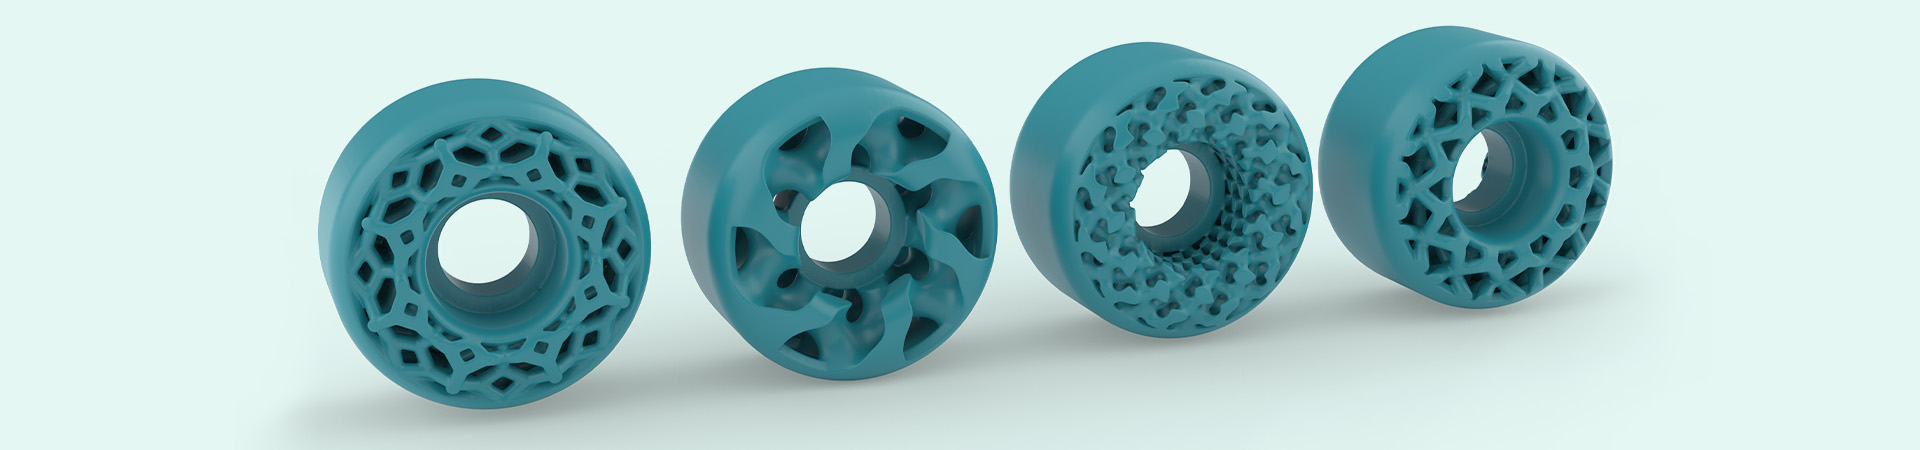 Render of blue skateboard wheels designed for the additive manufacturing process with various complex lattice structures included.